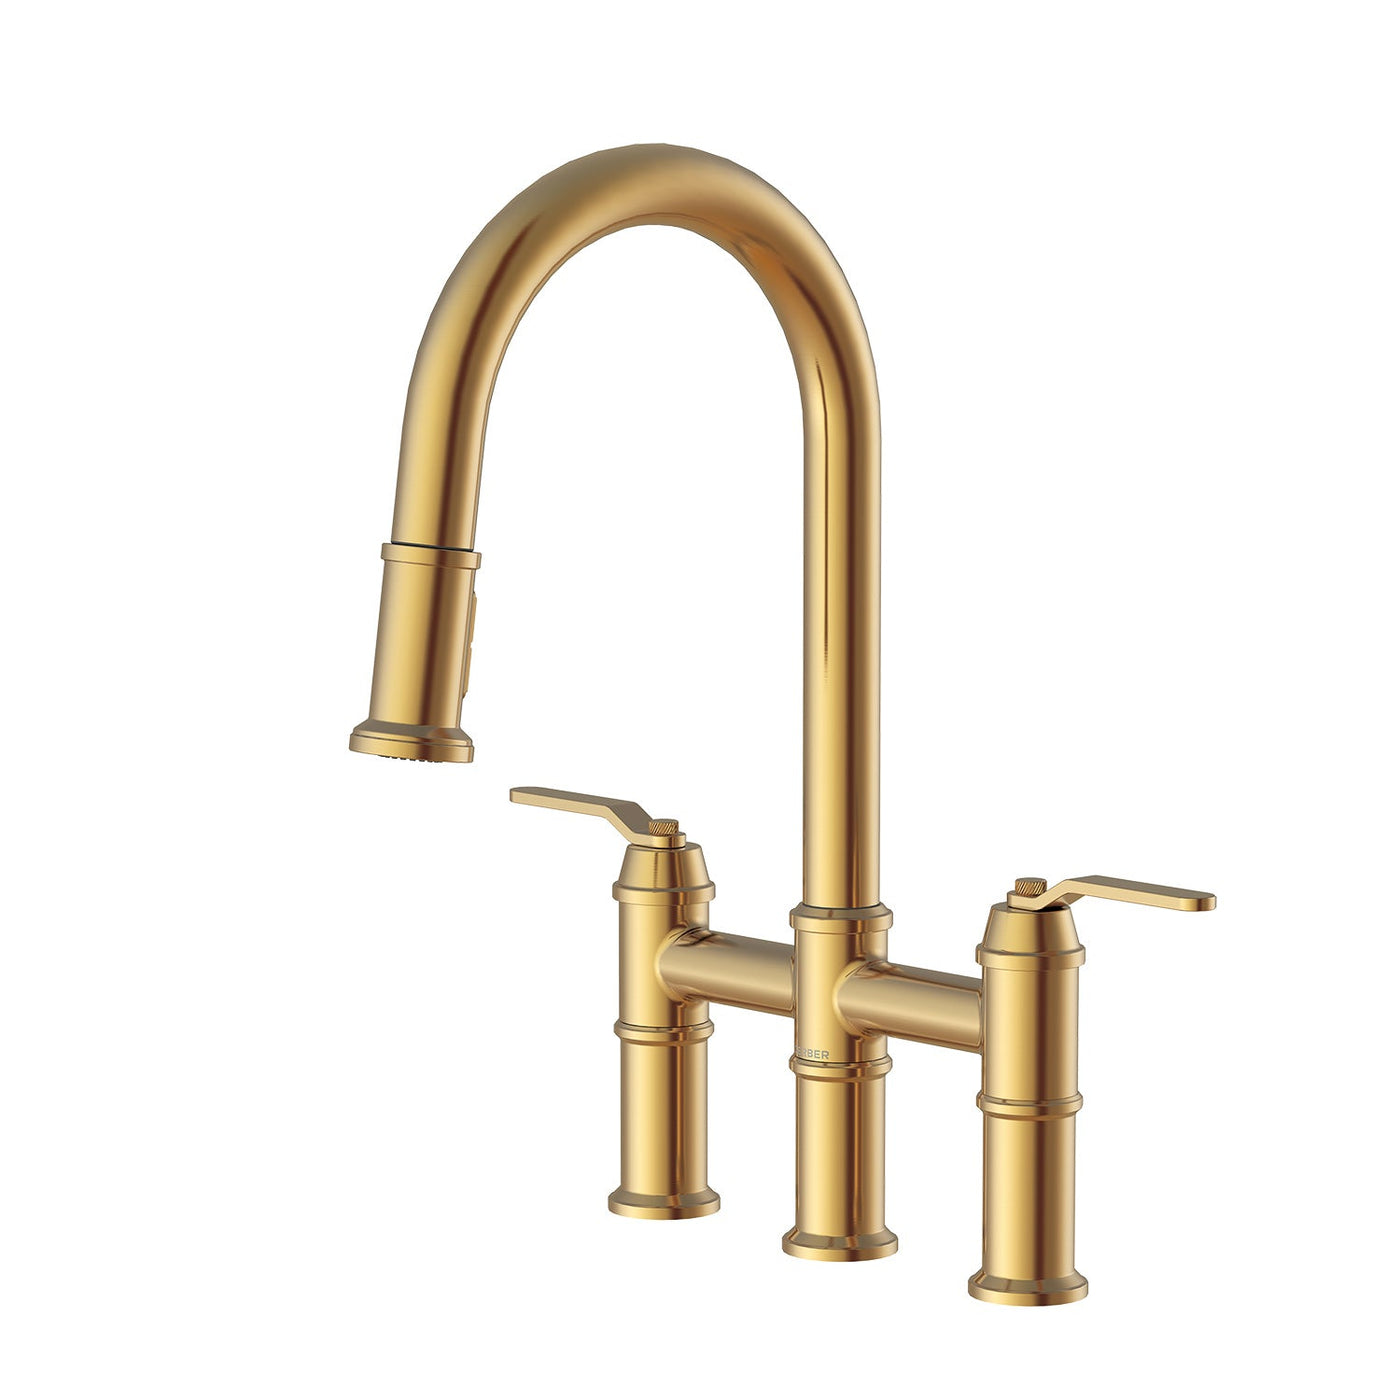 Kinzie 2H Bridge Pull-Down Kitchen Faucet 1.75gpm Brushed Bronze